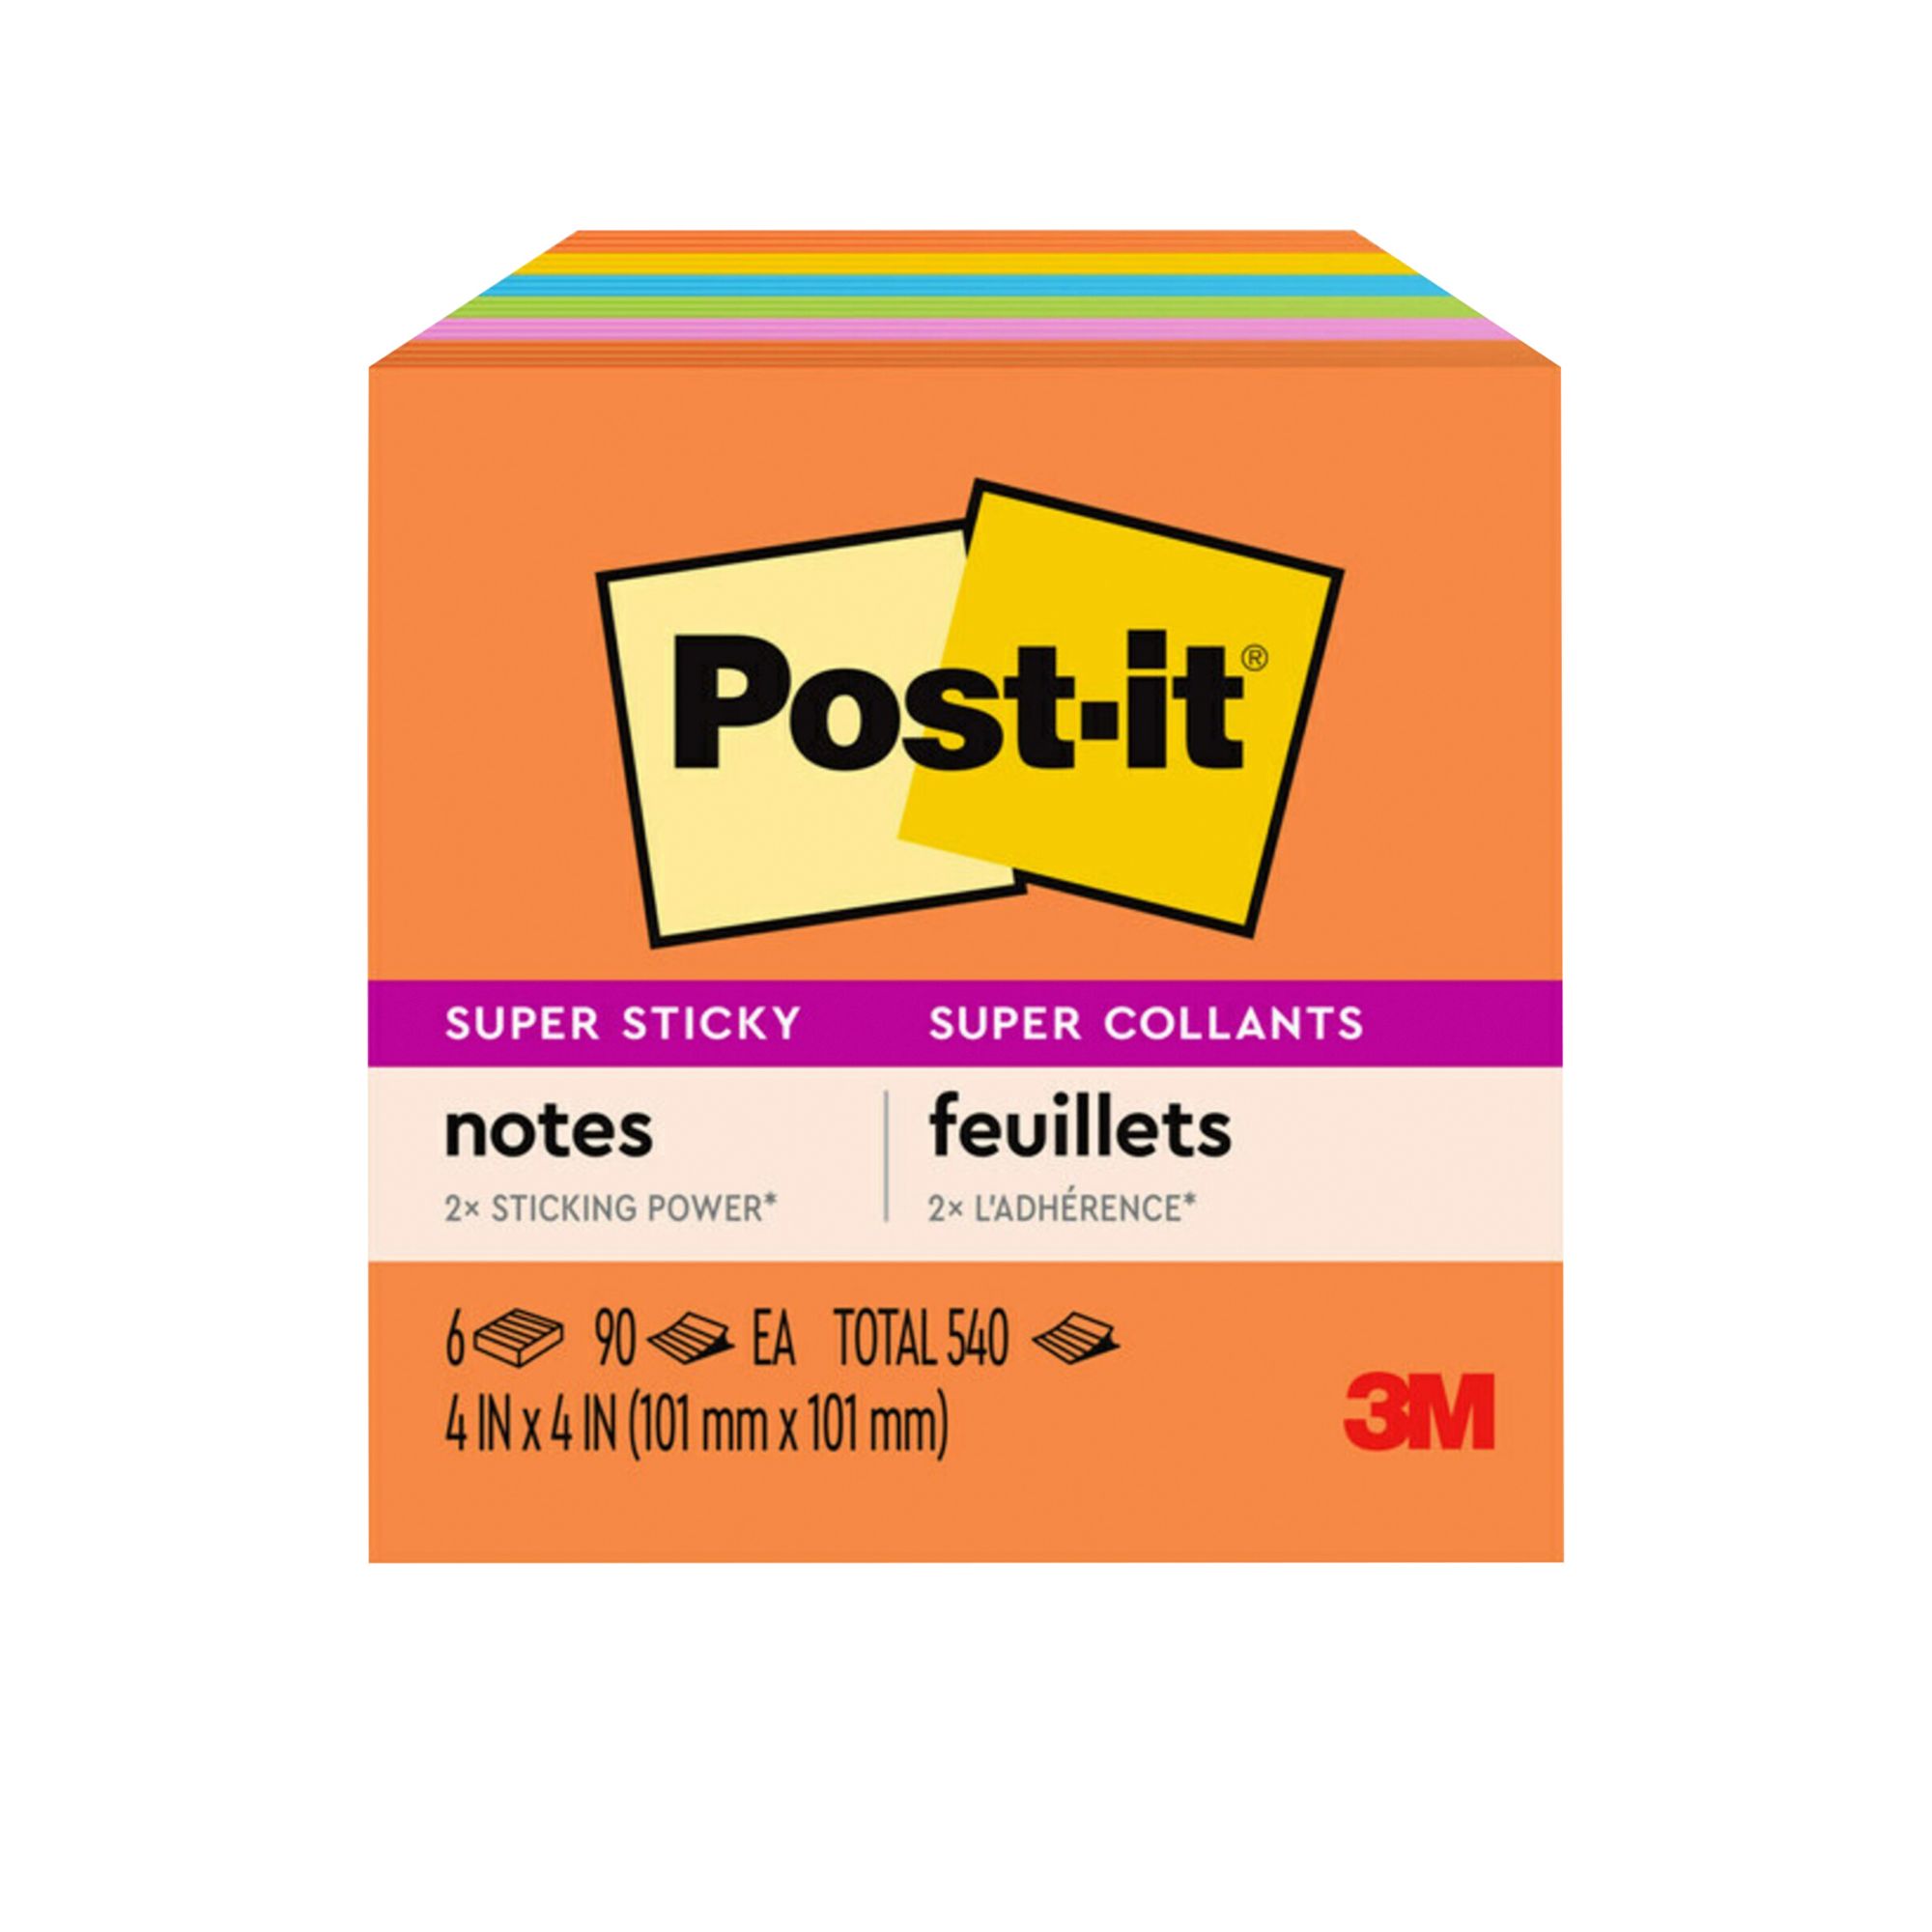 Post-it Recycled Super Sticky Notes Made with 100% Recycled Paper, 3 in x 3  in, Wanderlust Pastels, 5 Pads